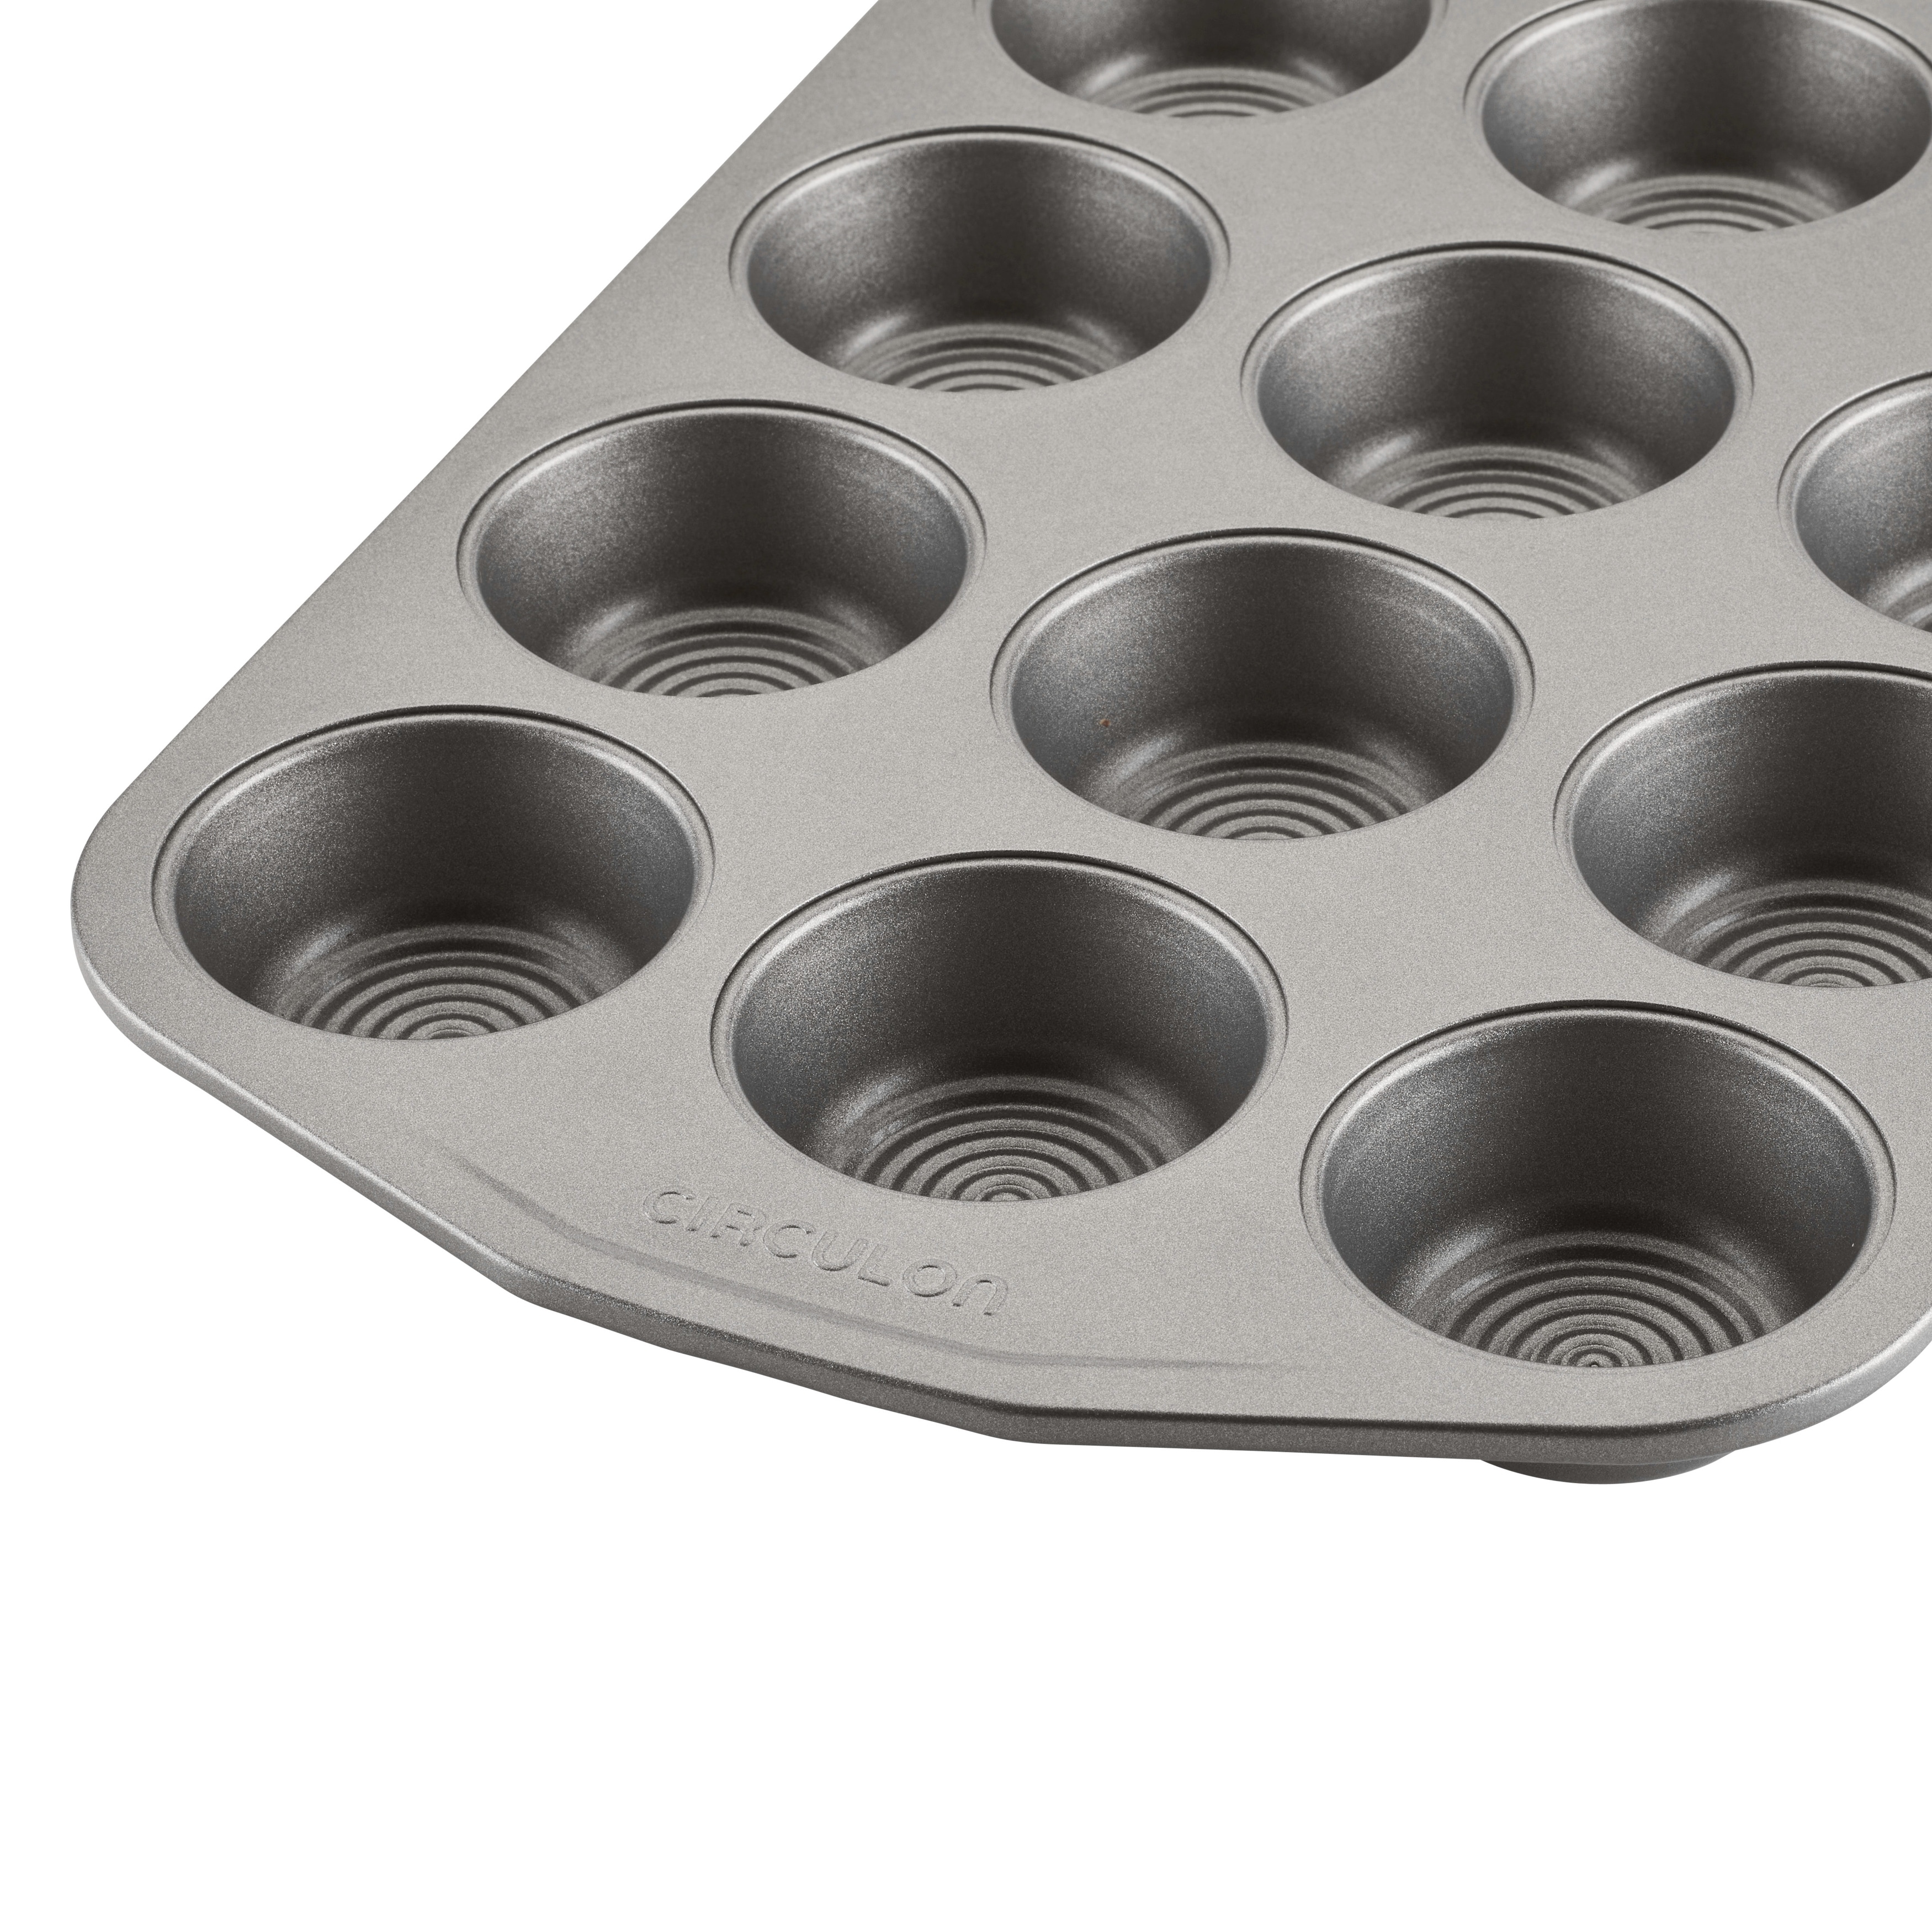 https://ak1.ostkcdn.com/images/products/is/images/direct/d13c6ef0b5338fffe9d28373c1505a76c367f289/Circulon-Bakeware-Nonstick-Muffin-Pan%2C-12-Cup%2C-Gray.jpg